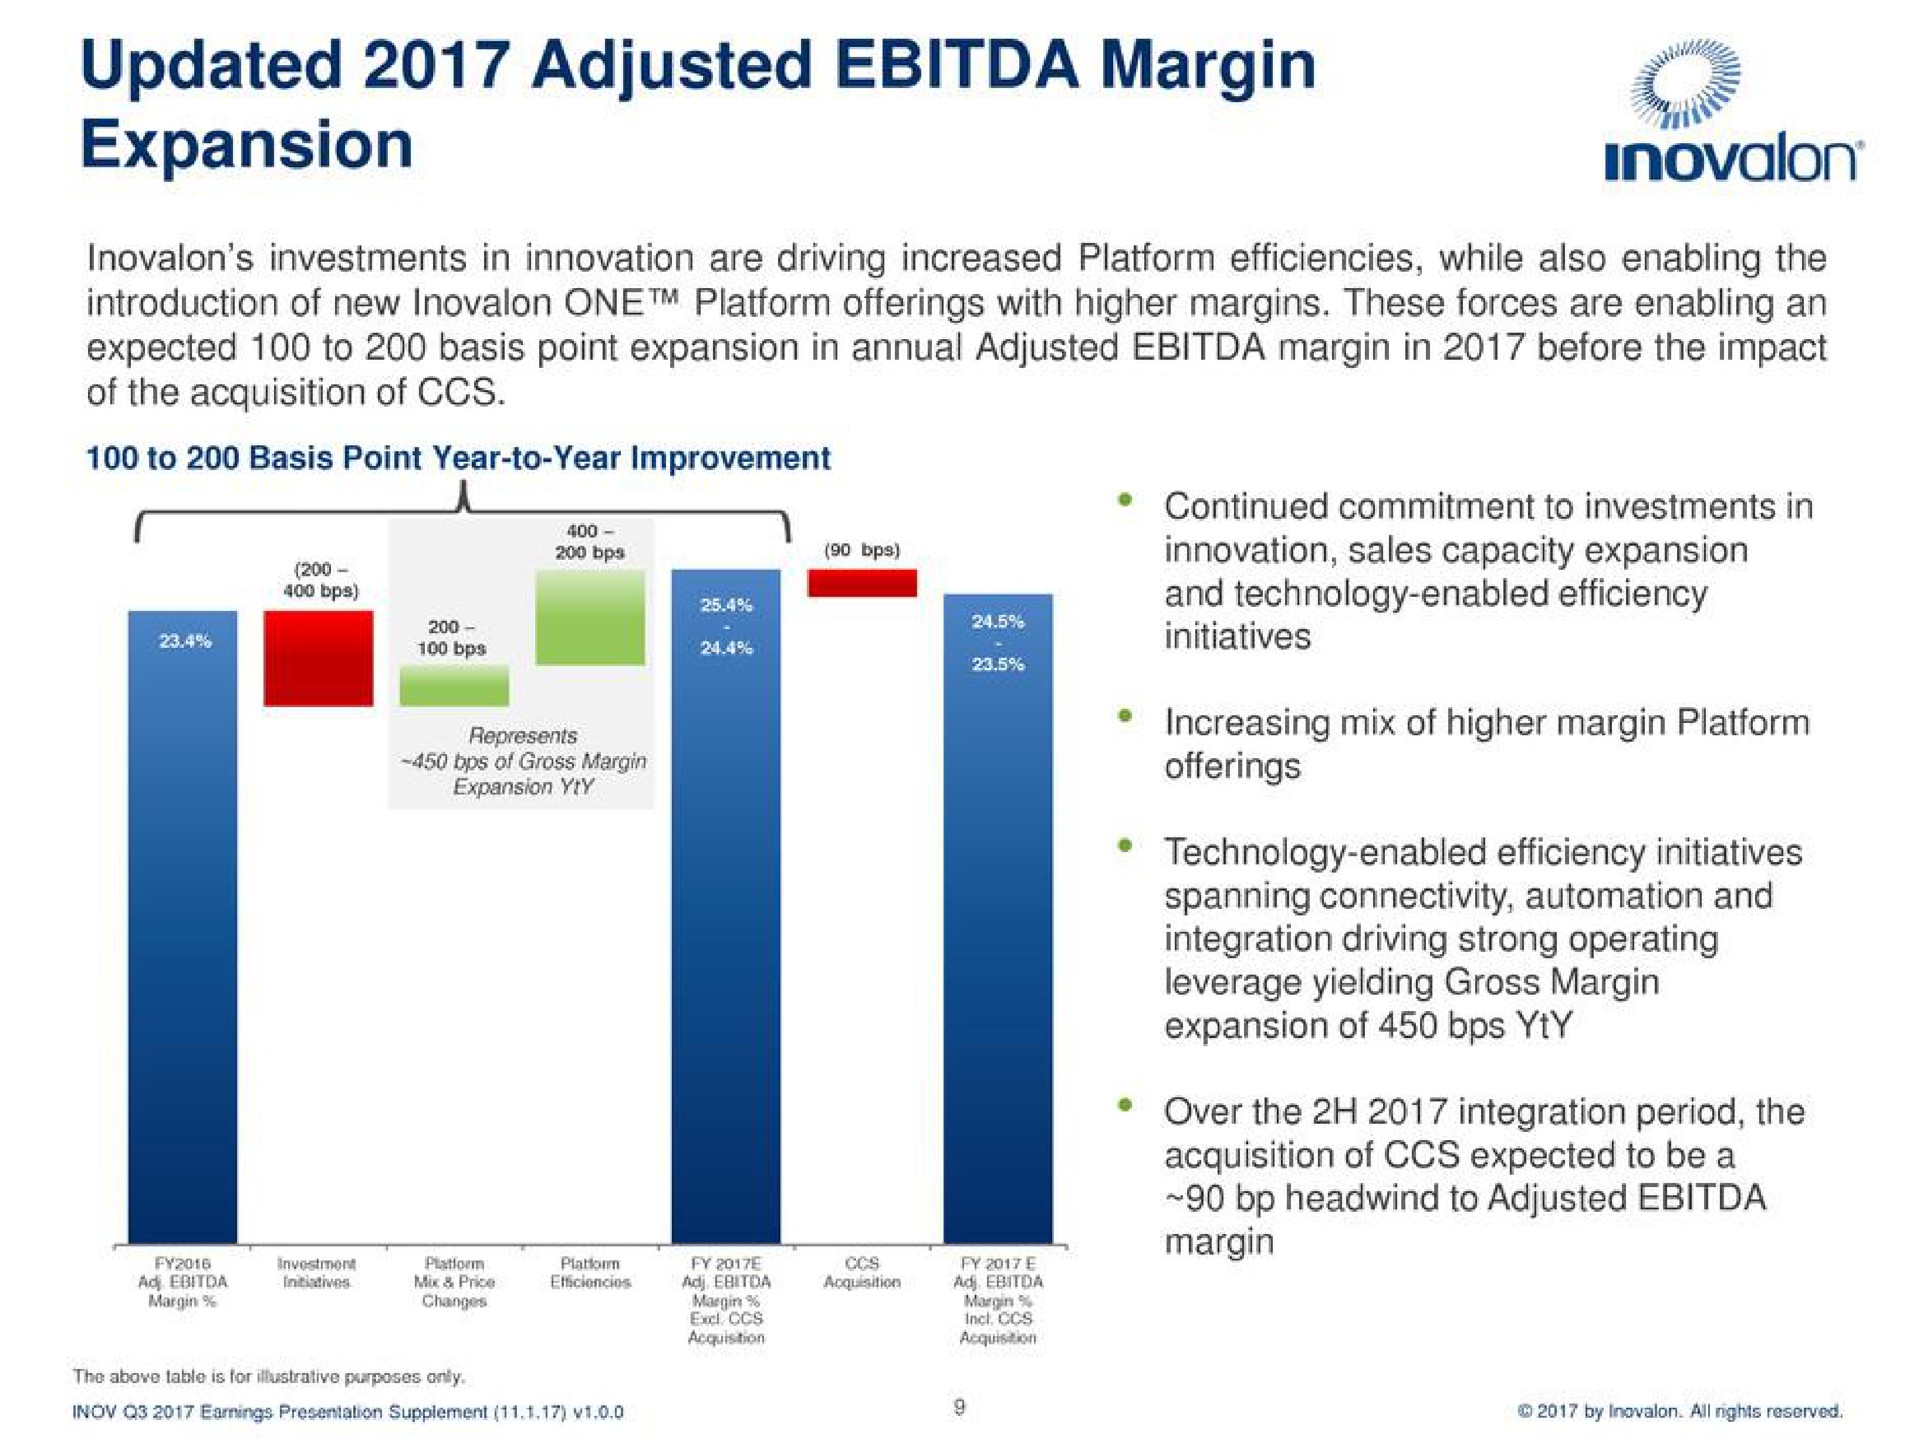 updated adjusted margin expansion is | Inovalon